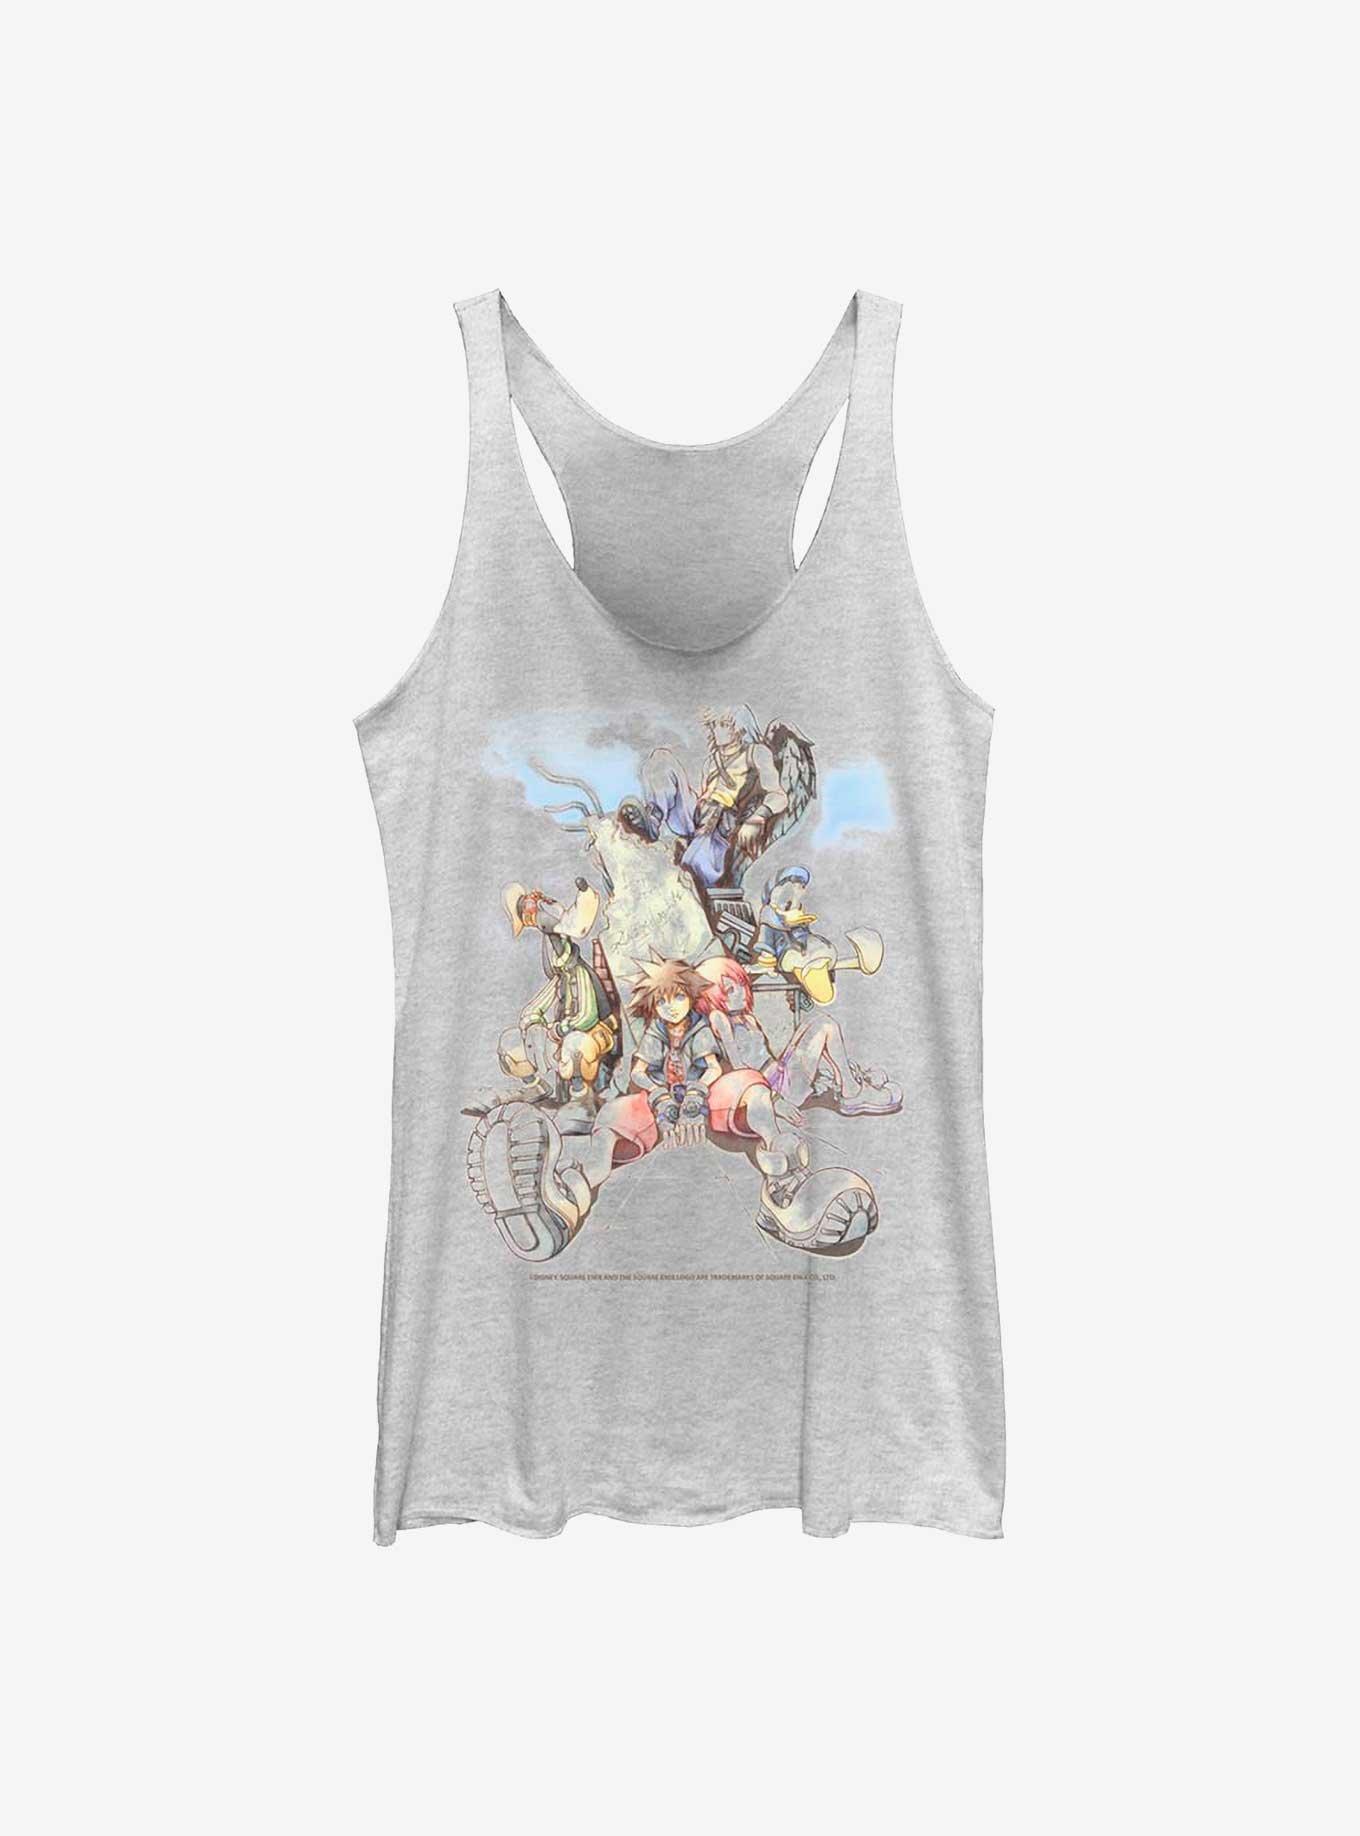 Disney Kingdom Hearts Group In The Clouds Girls Tank, WHITE HTR, hi-res